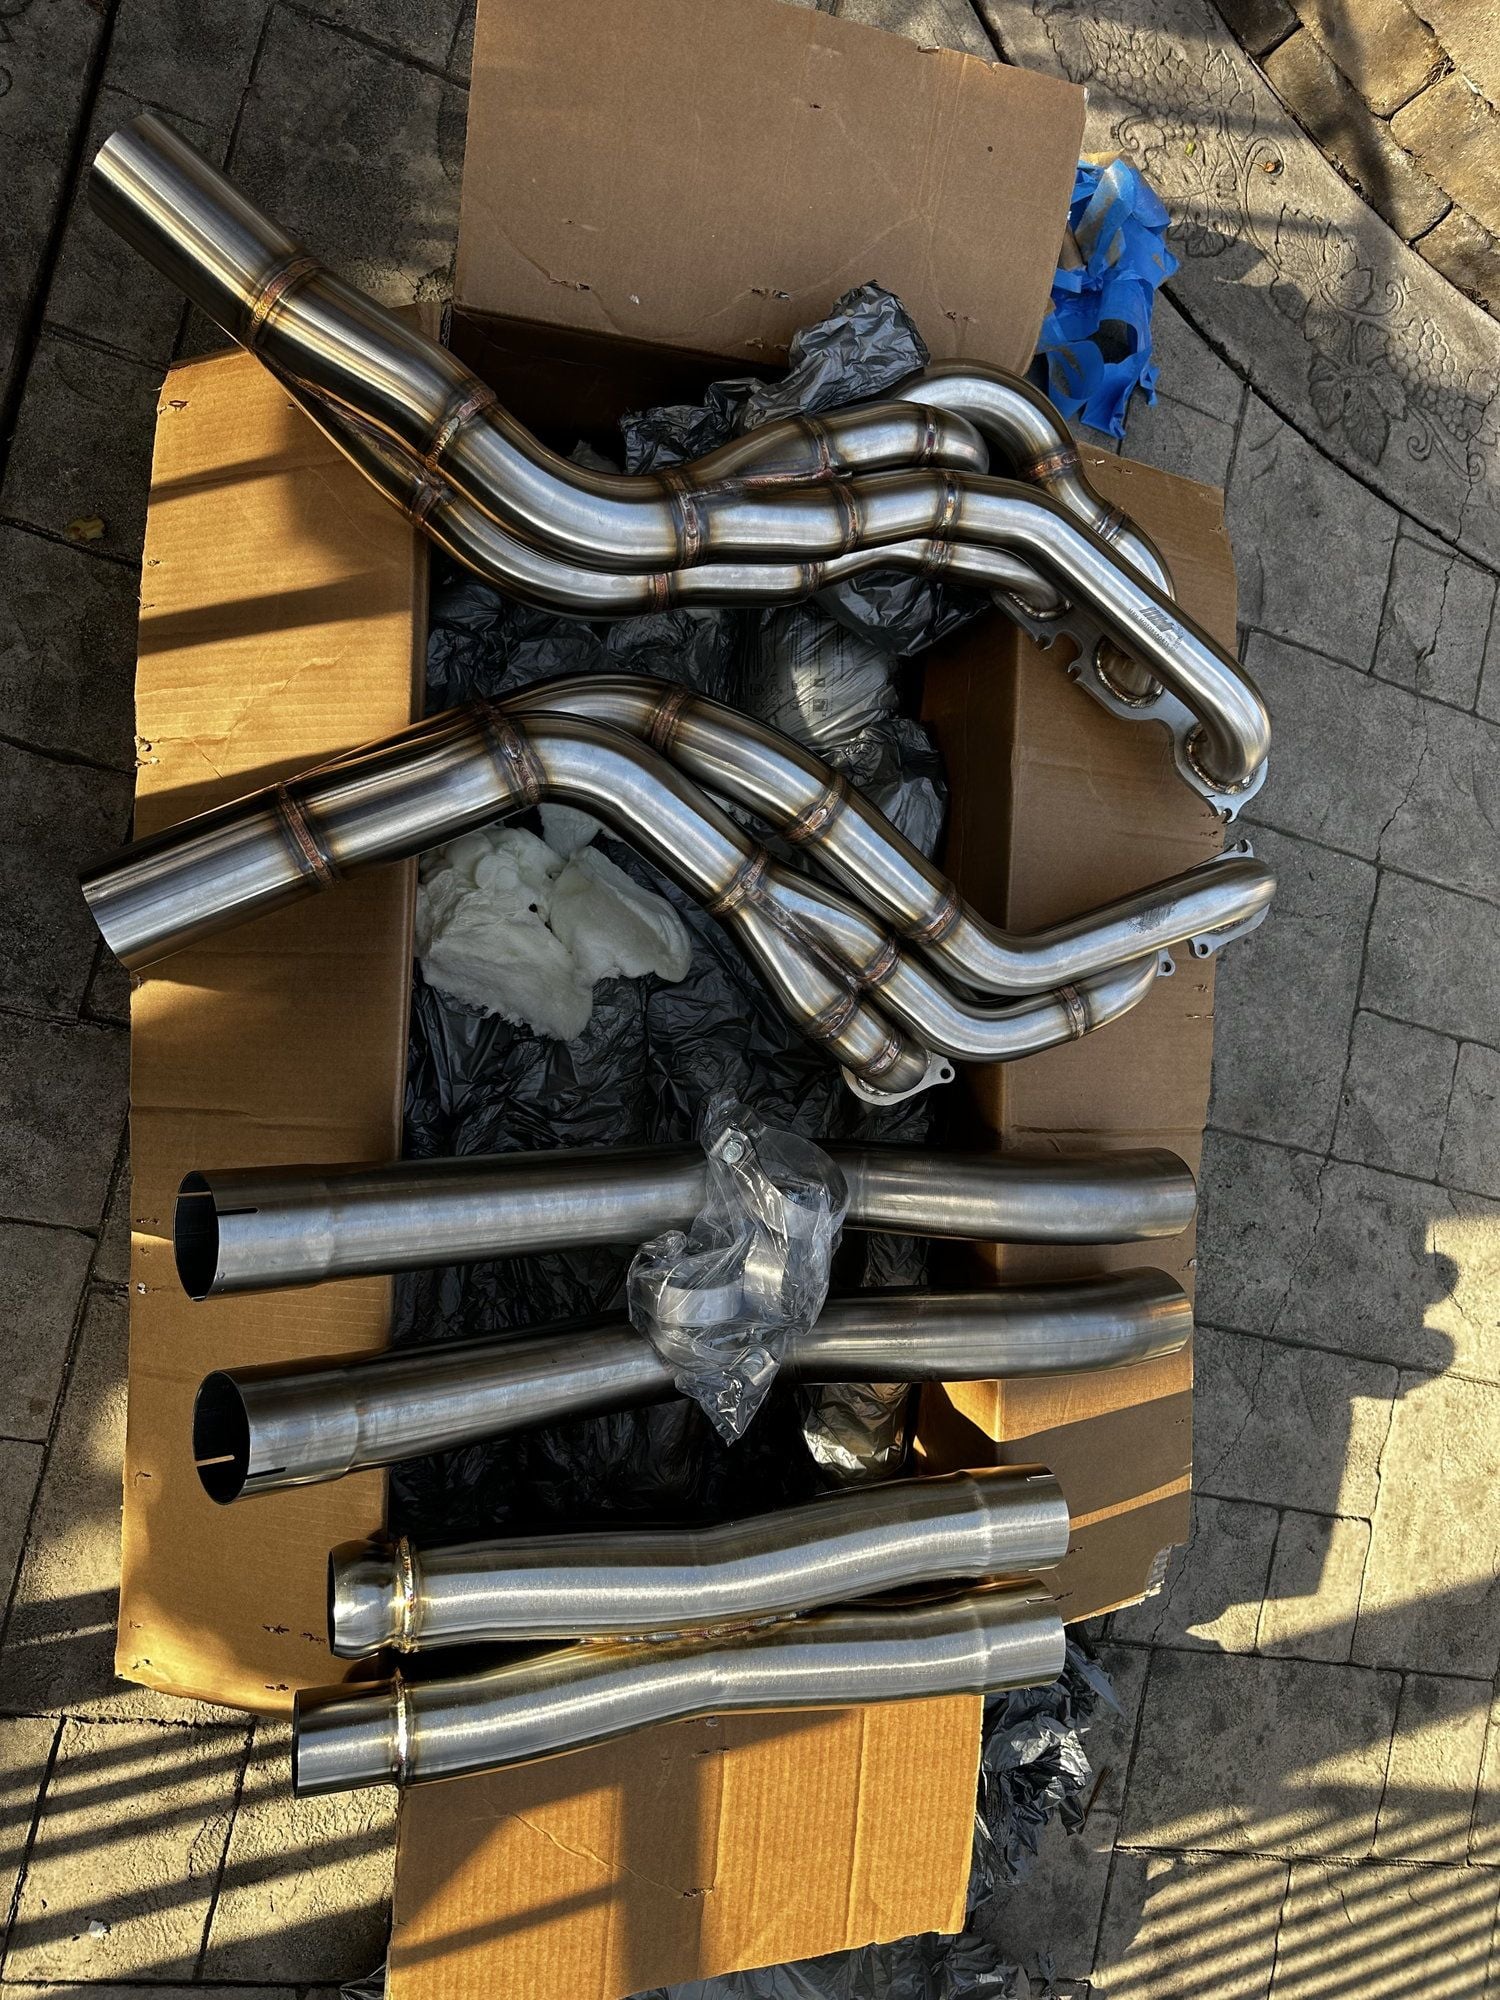 Engine - Exhaust - C63 MBH Long Tube Headers + Mid-Pipe with X-Pipe - New - San Jose, CA 95112, United States